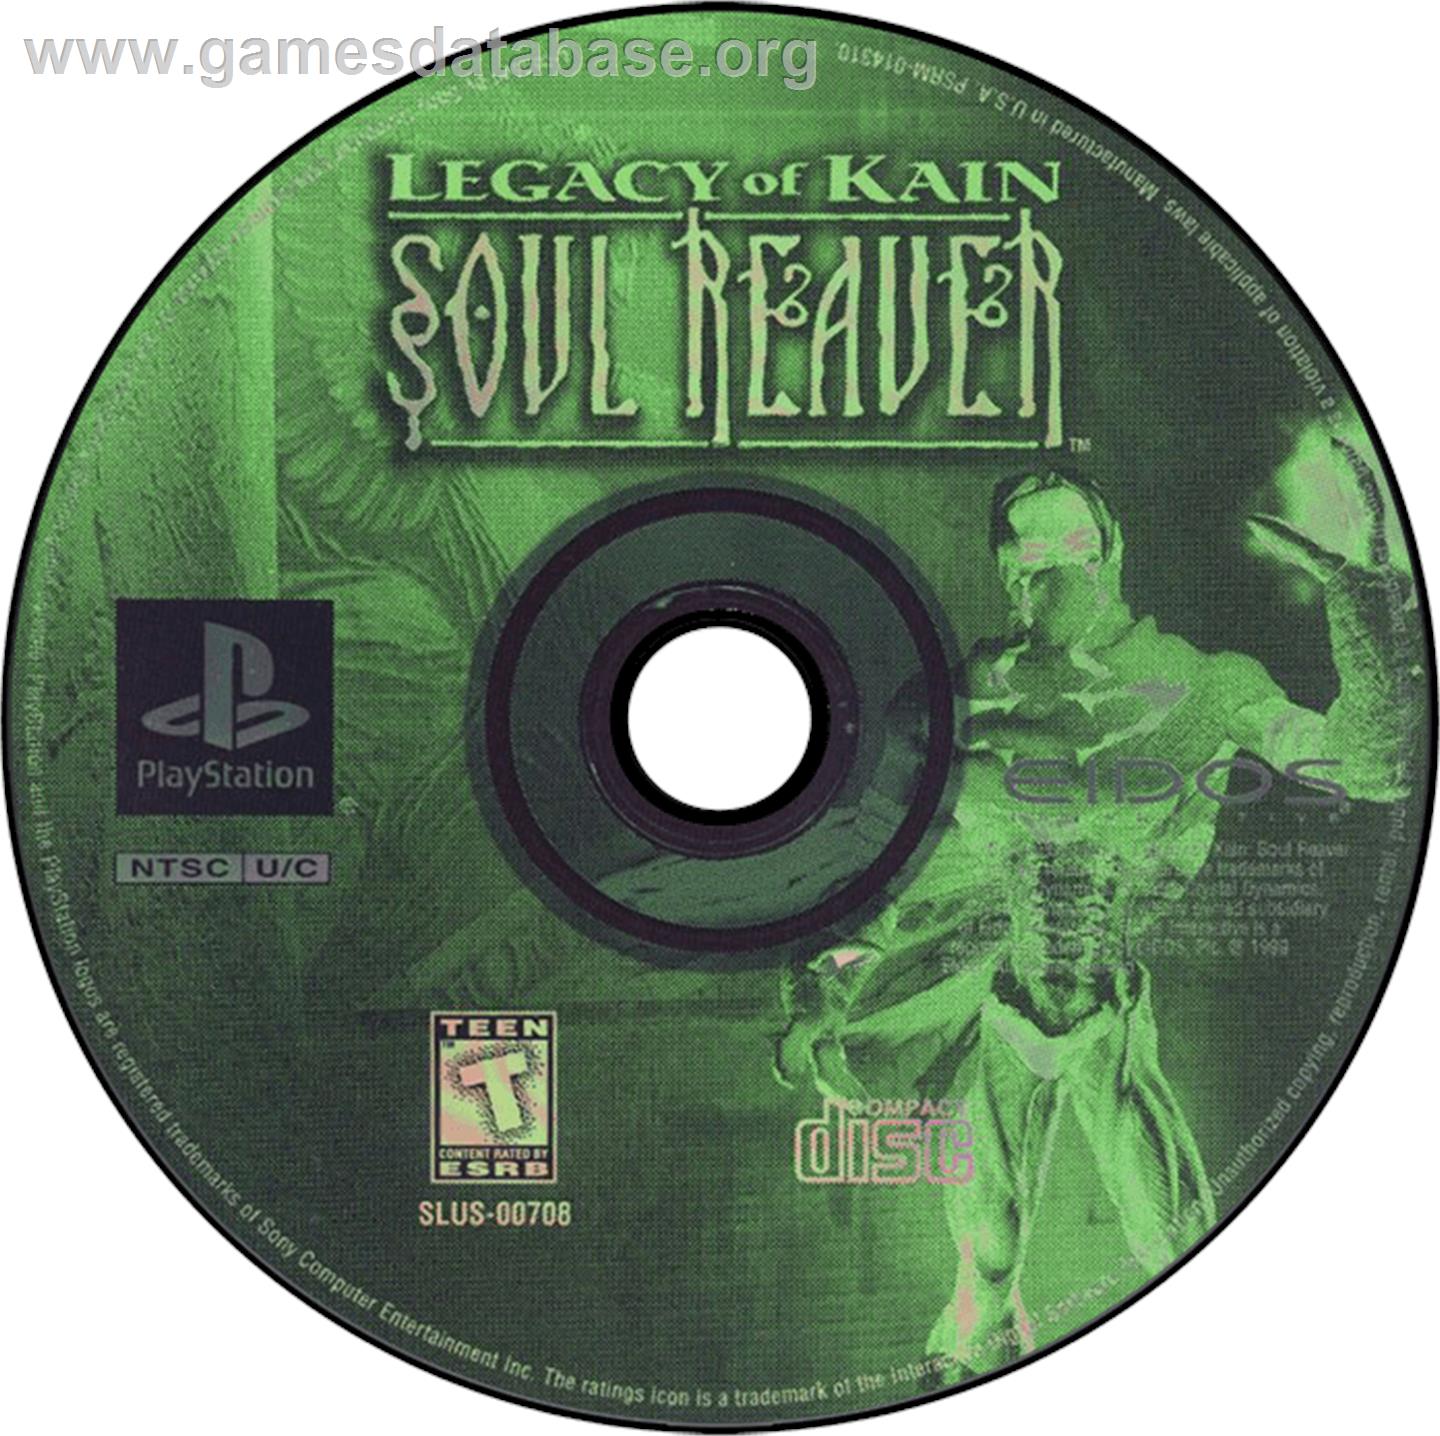 Legacy of Kain: Soul Reaver - Sony Playstation - Artwork - Disc